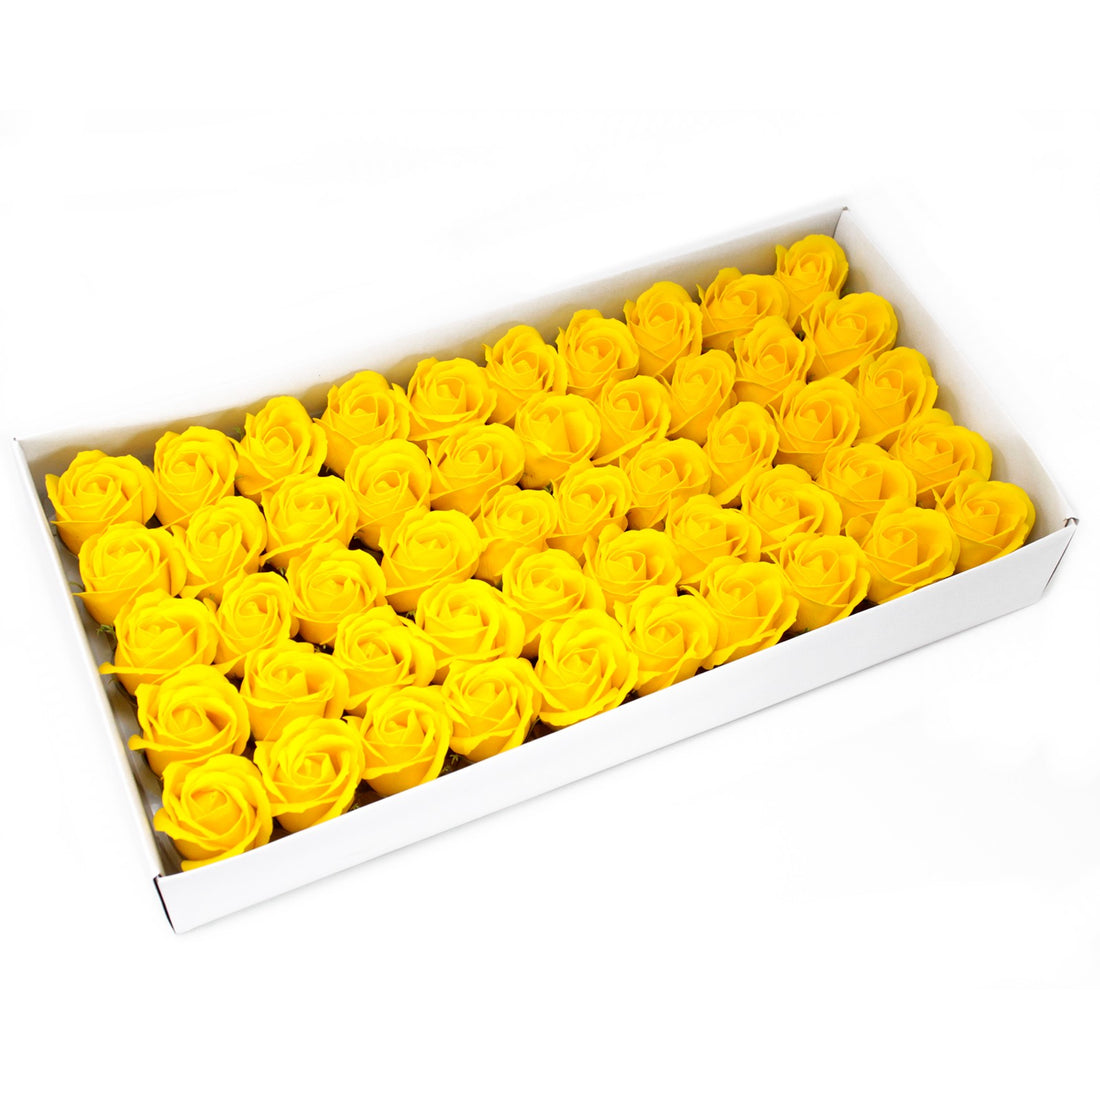 Craft Soap Flowers - Med Rose - Yellow x 10 pcs